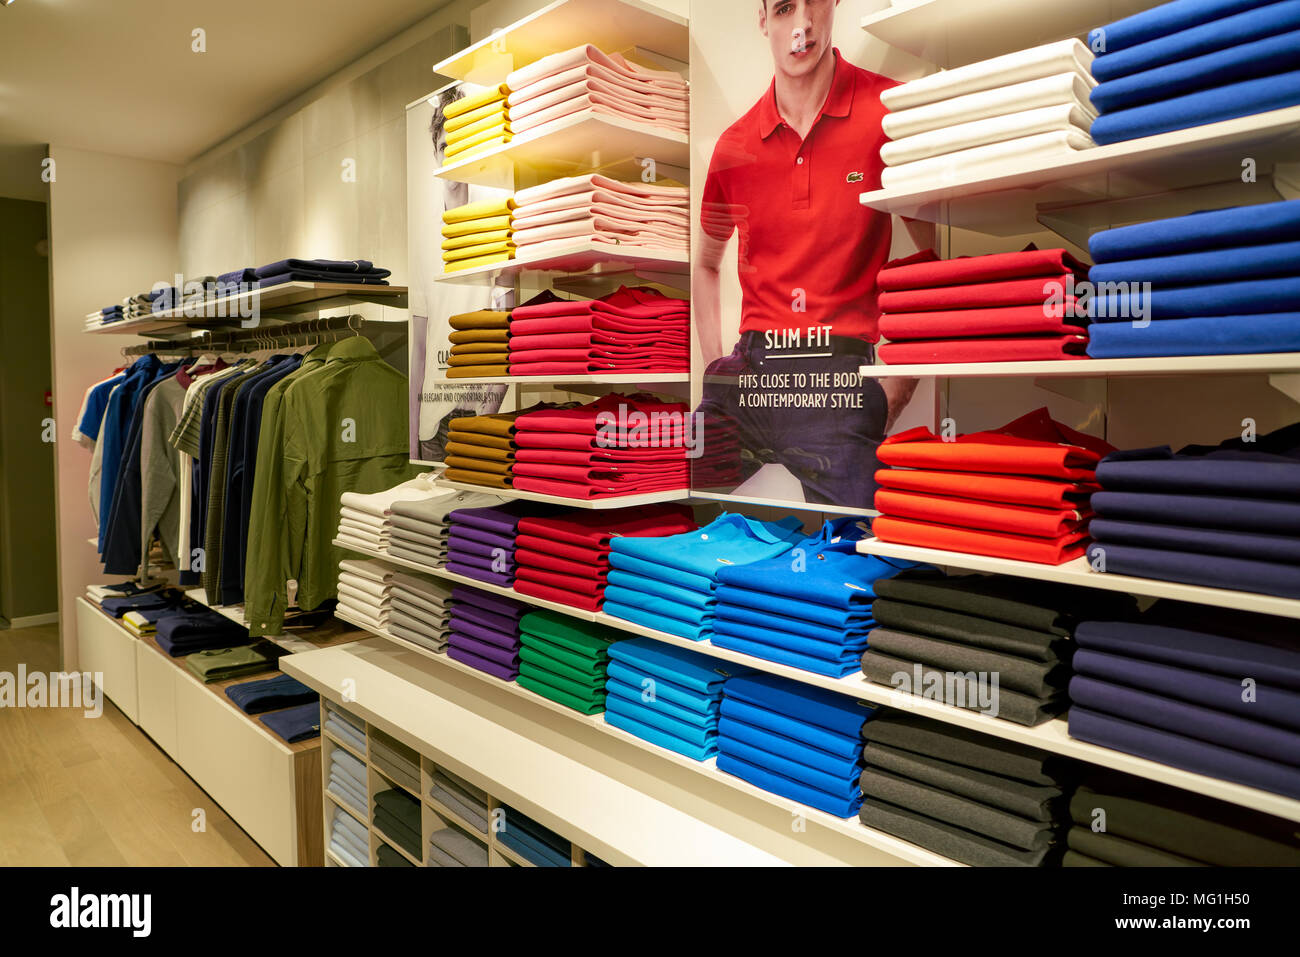 lacoste clothing outlet